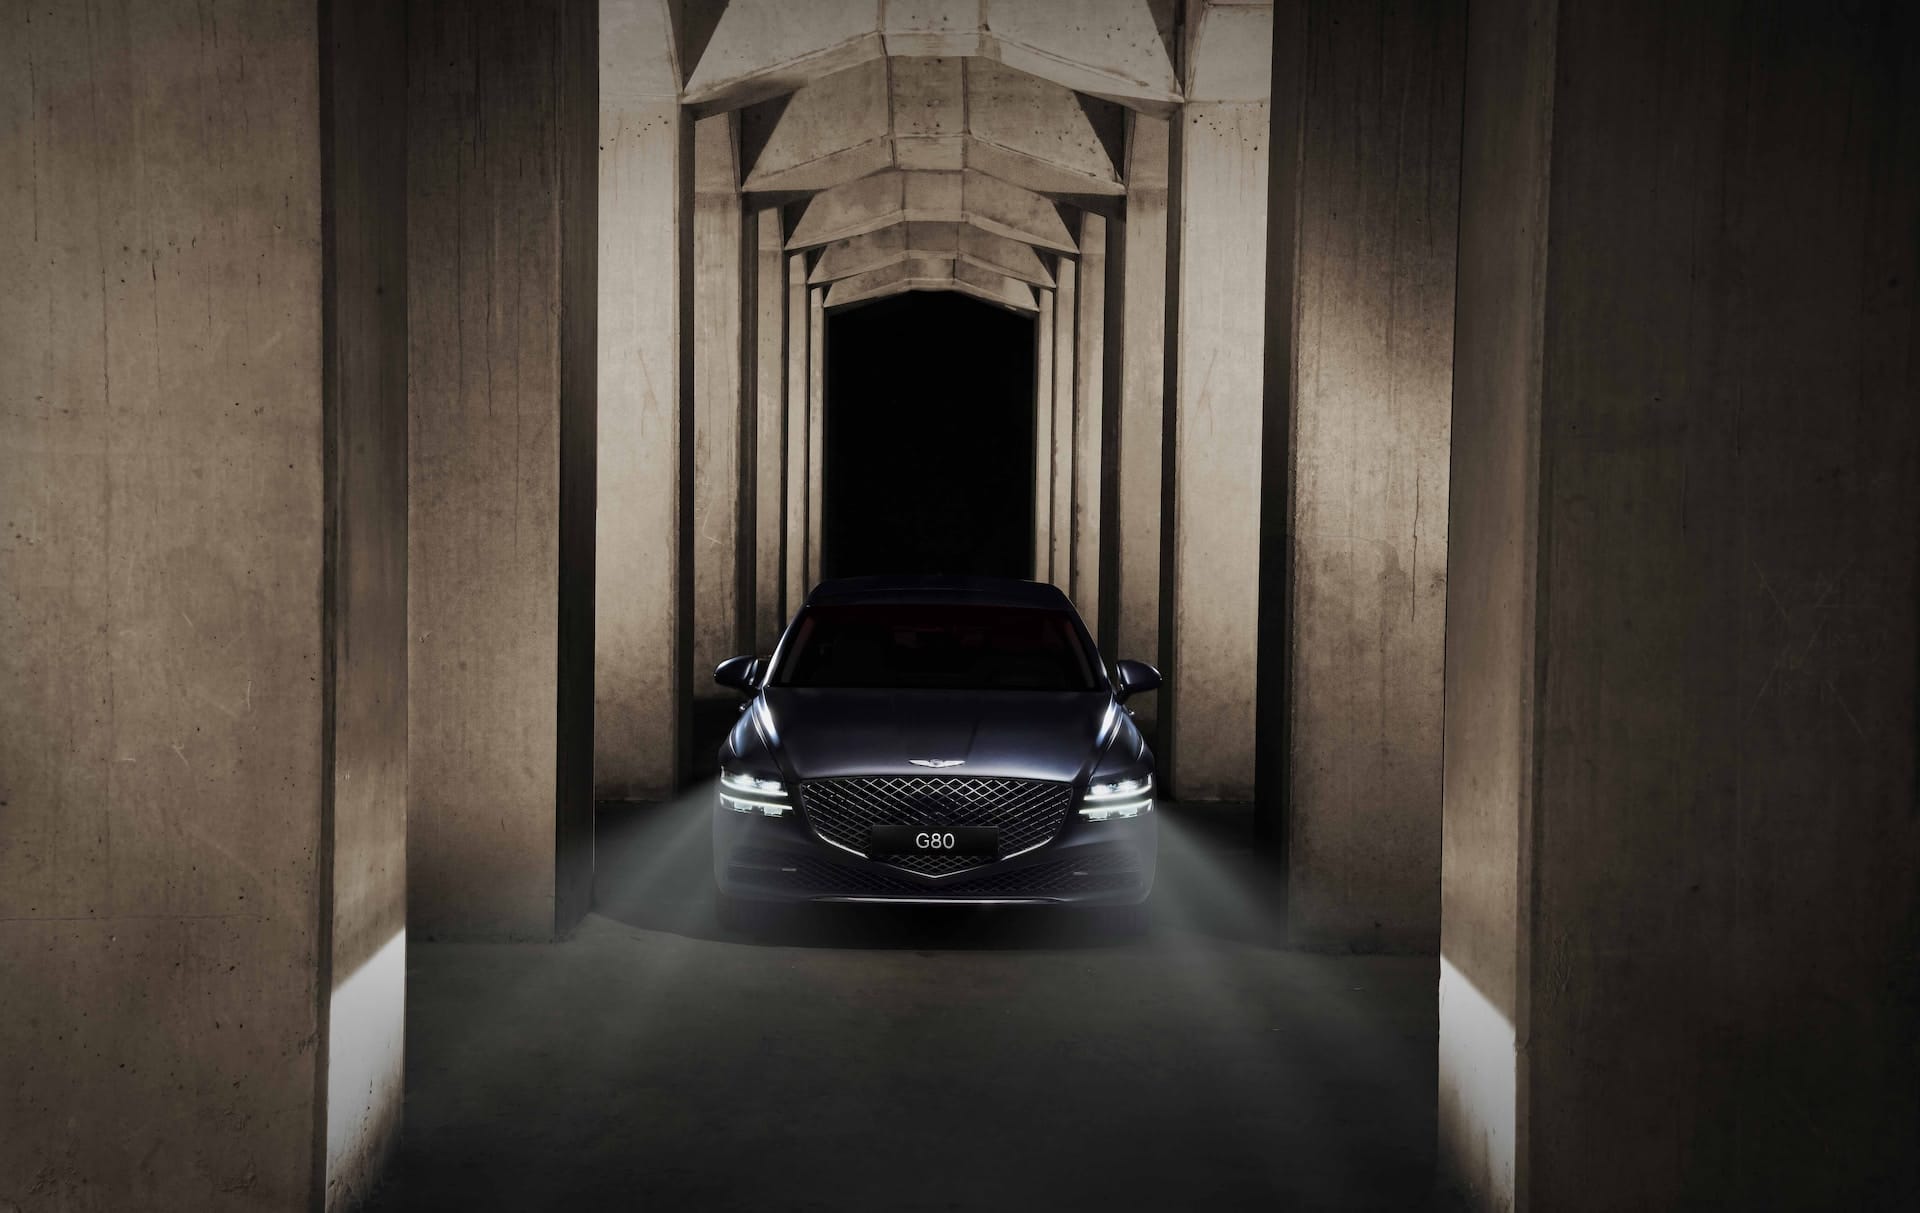 The Basics You Need to Know Prior to Transporting a Hyundai Genesis